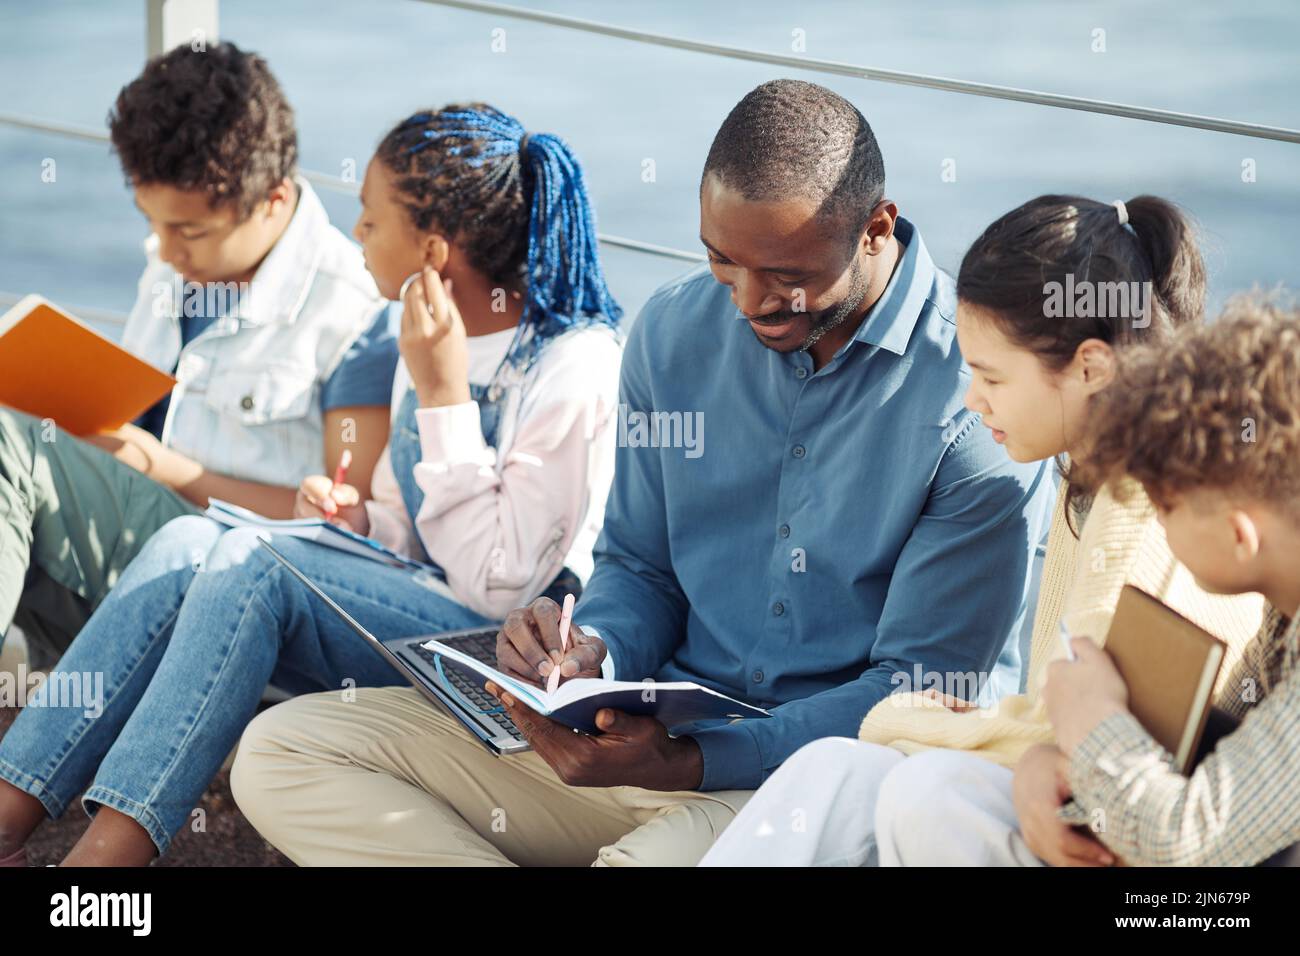 Portrait of smiling male teacher with diverse group of children enjoying outdoor class in sunlight Stock Photo